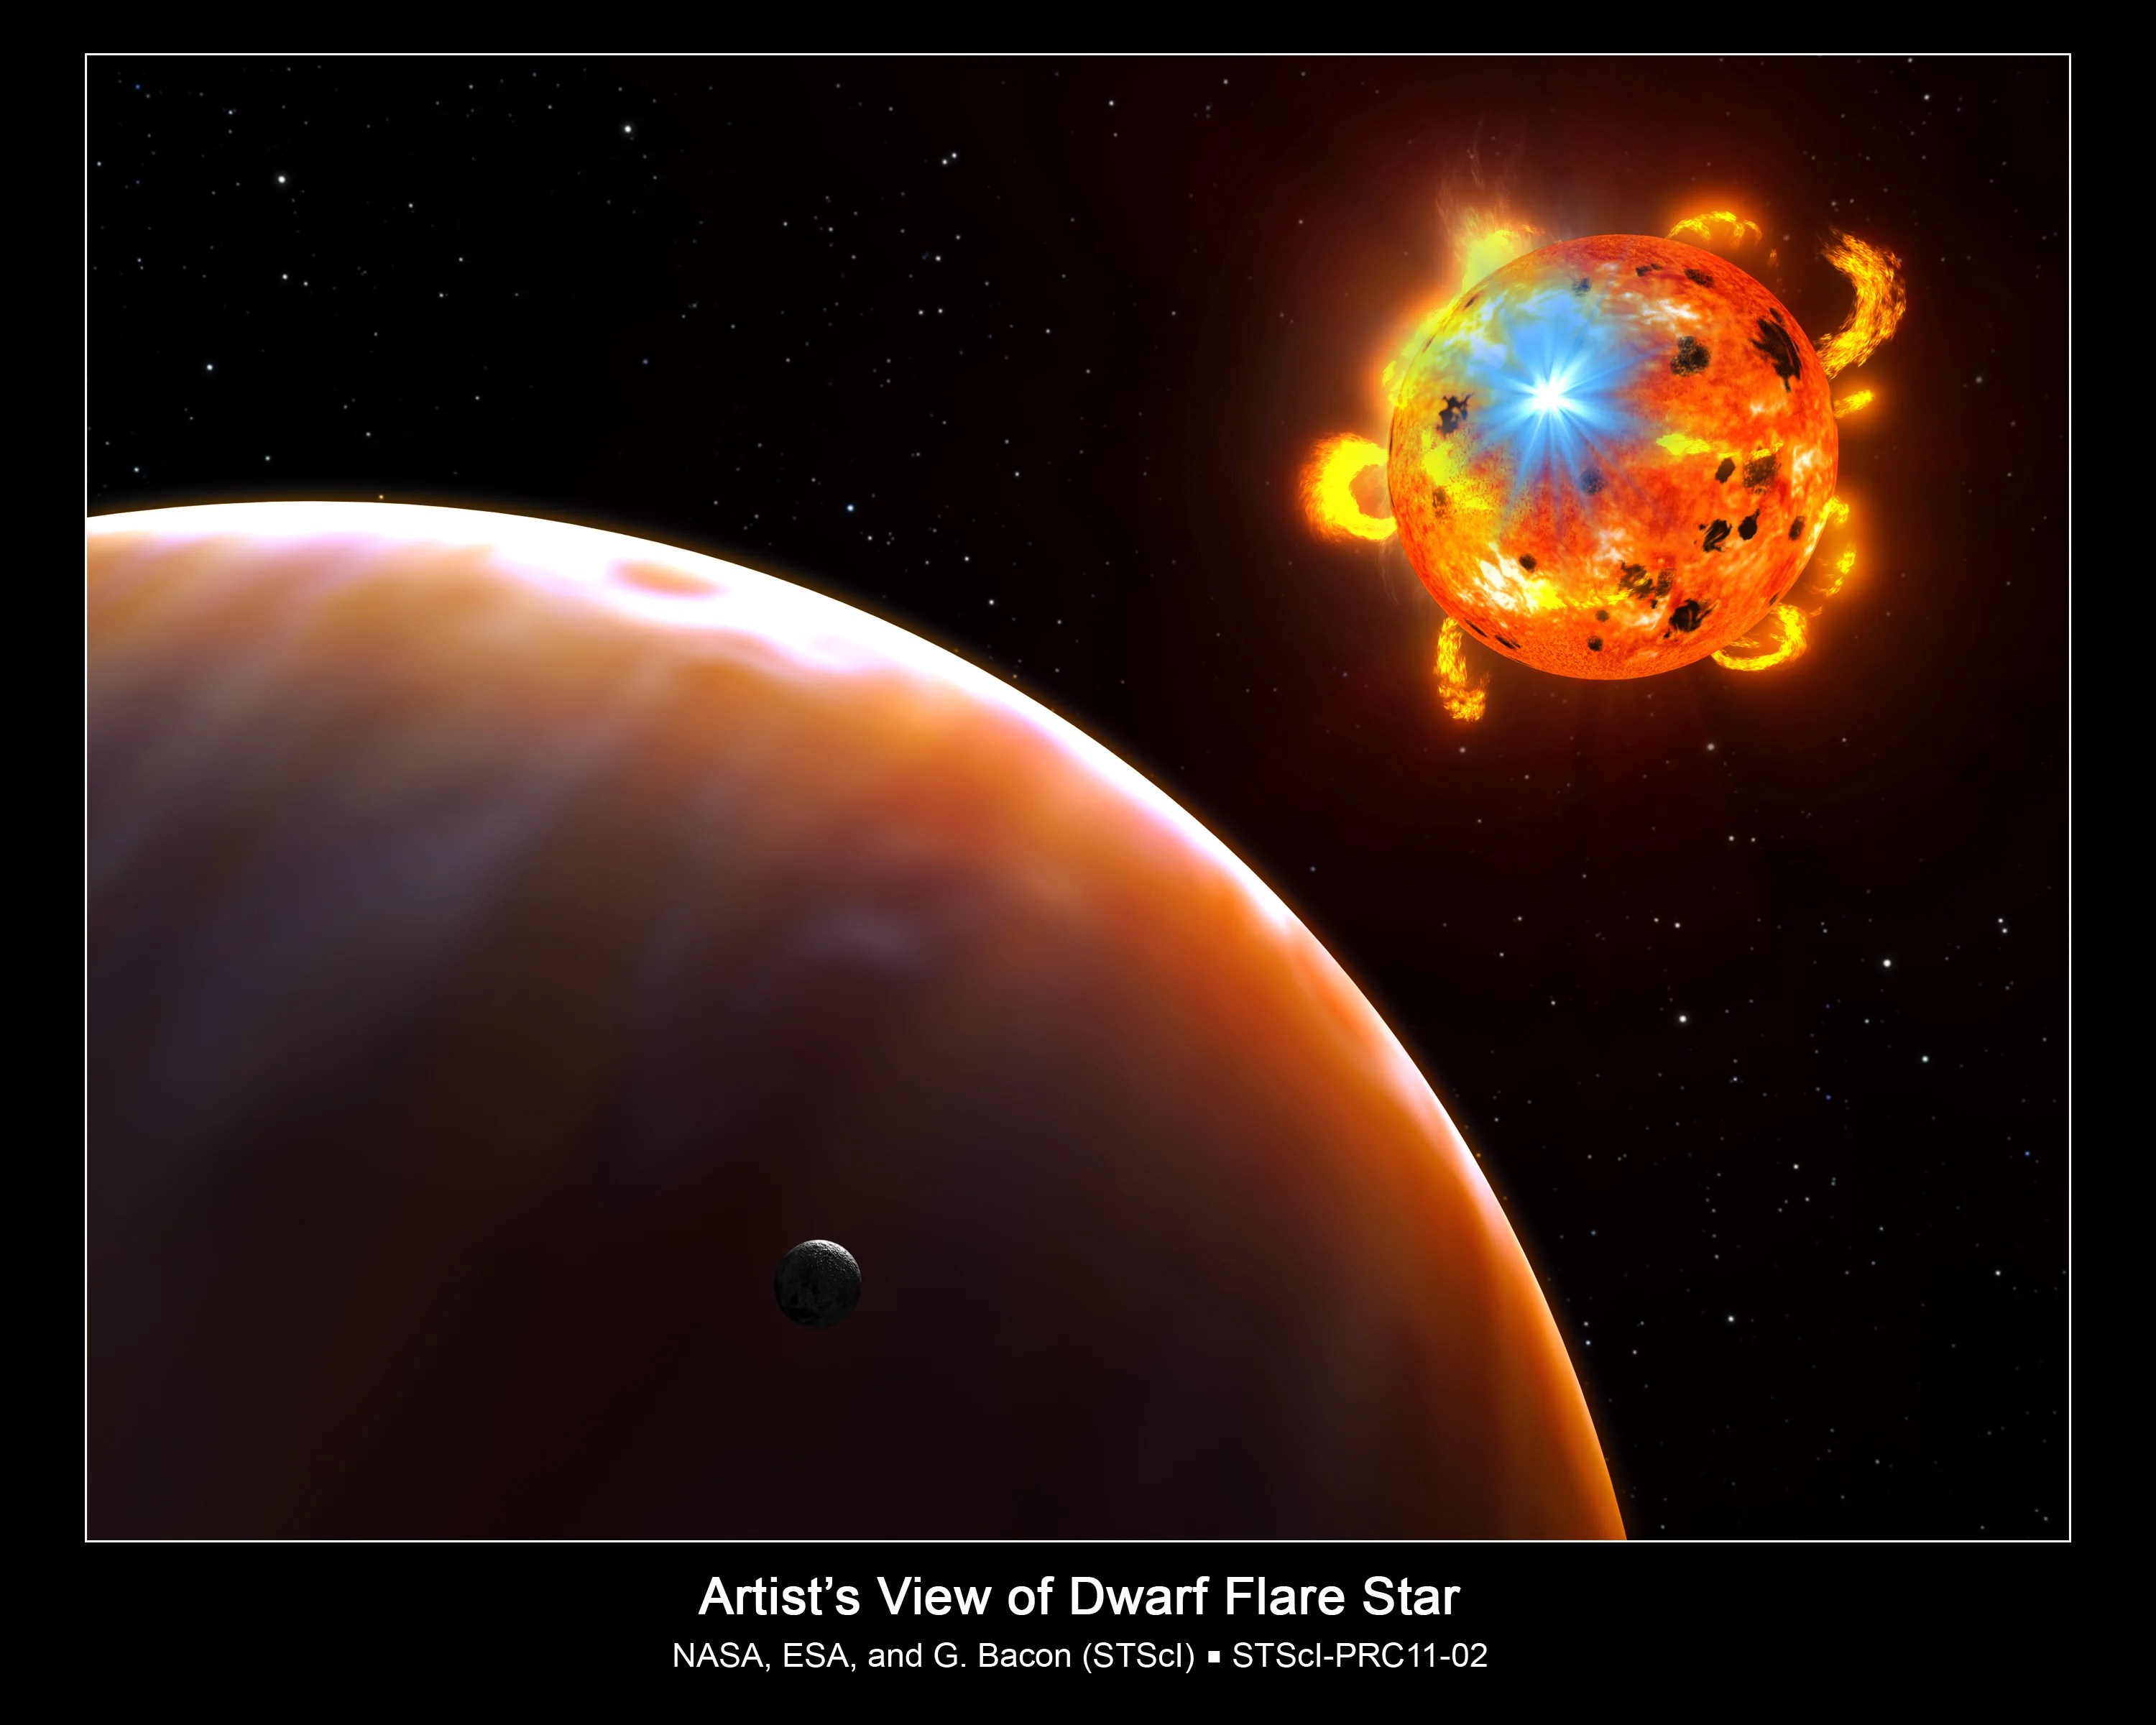 artists' concept of a red dwarf emitting powerful flares